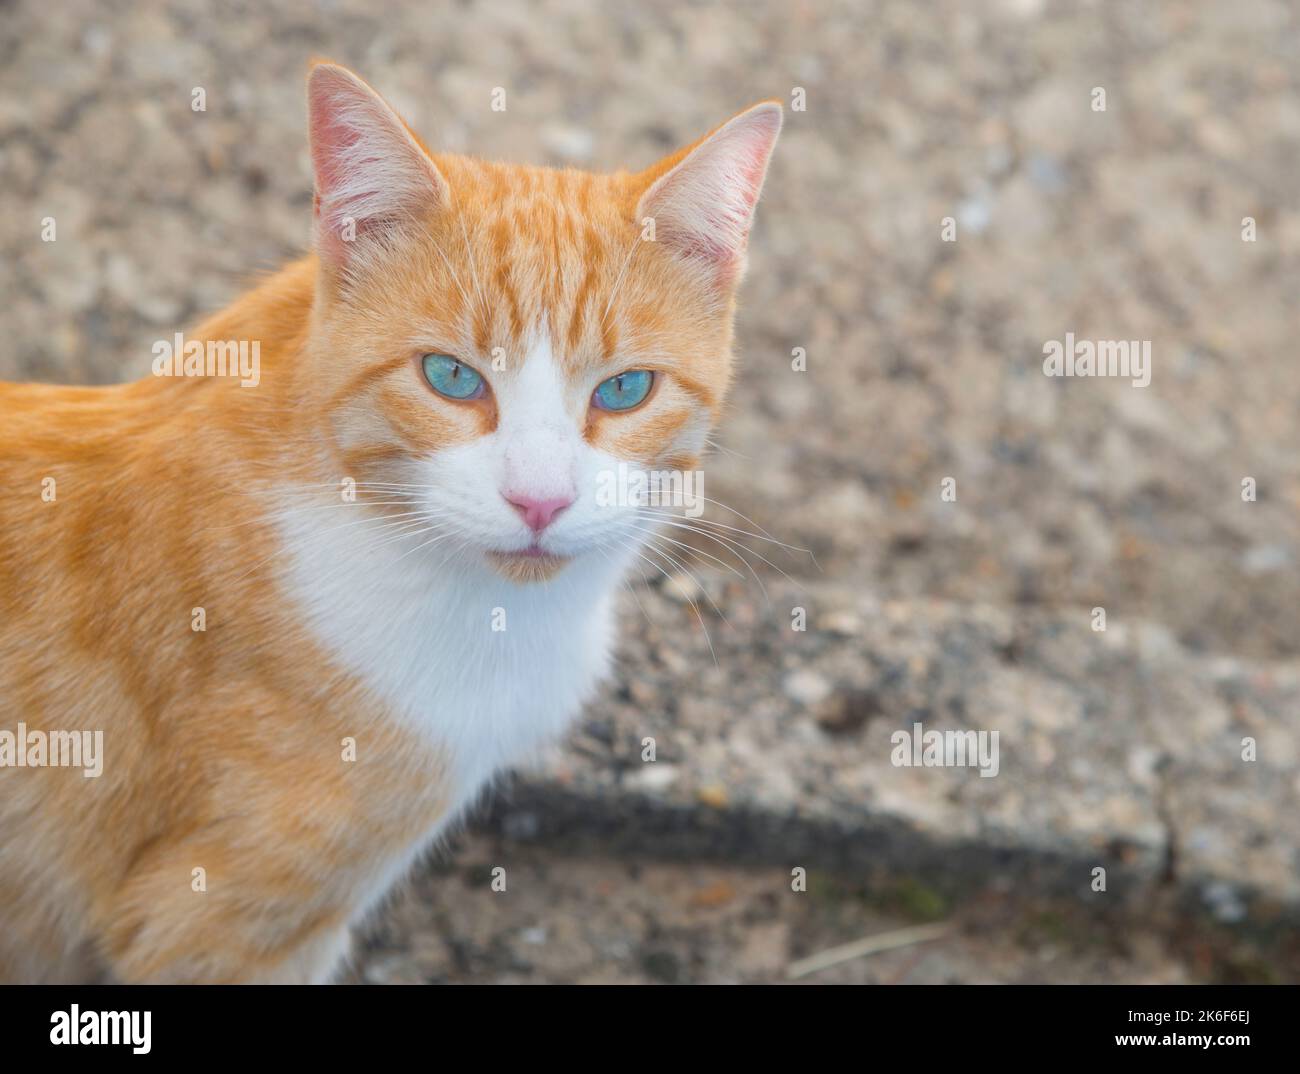 Tabby and white cat looking at the camera. Close view. Stock Photo